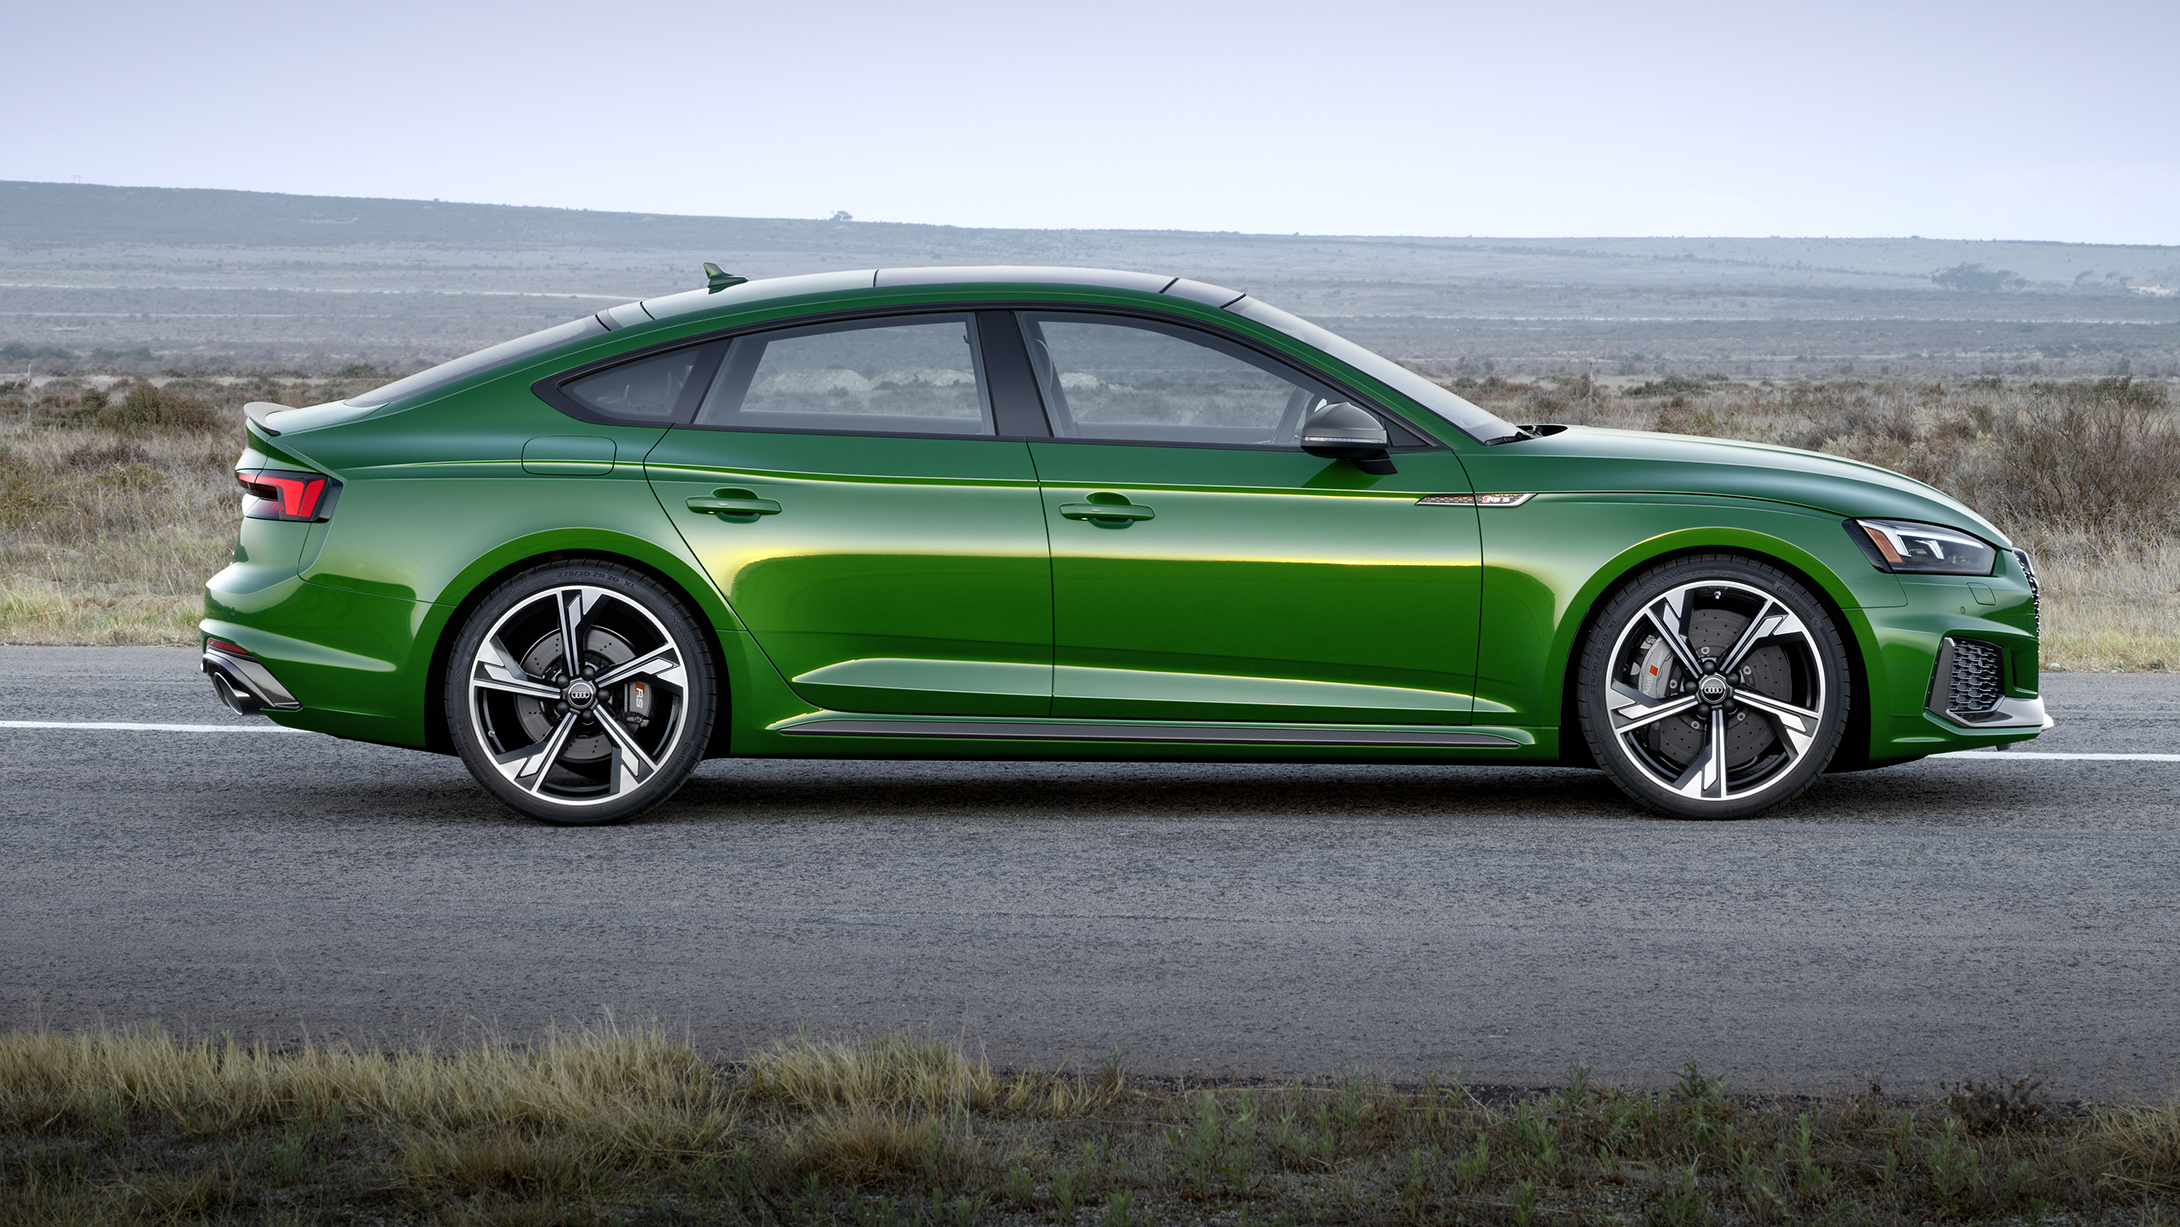 New Audi RS5 Sportback is a 444bhp Quattro hatchback'd coupe | Top Gear